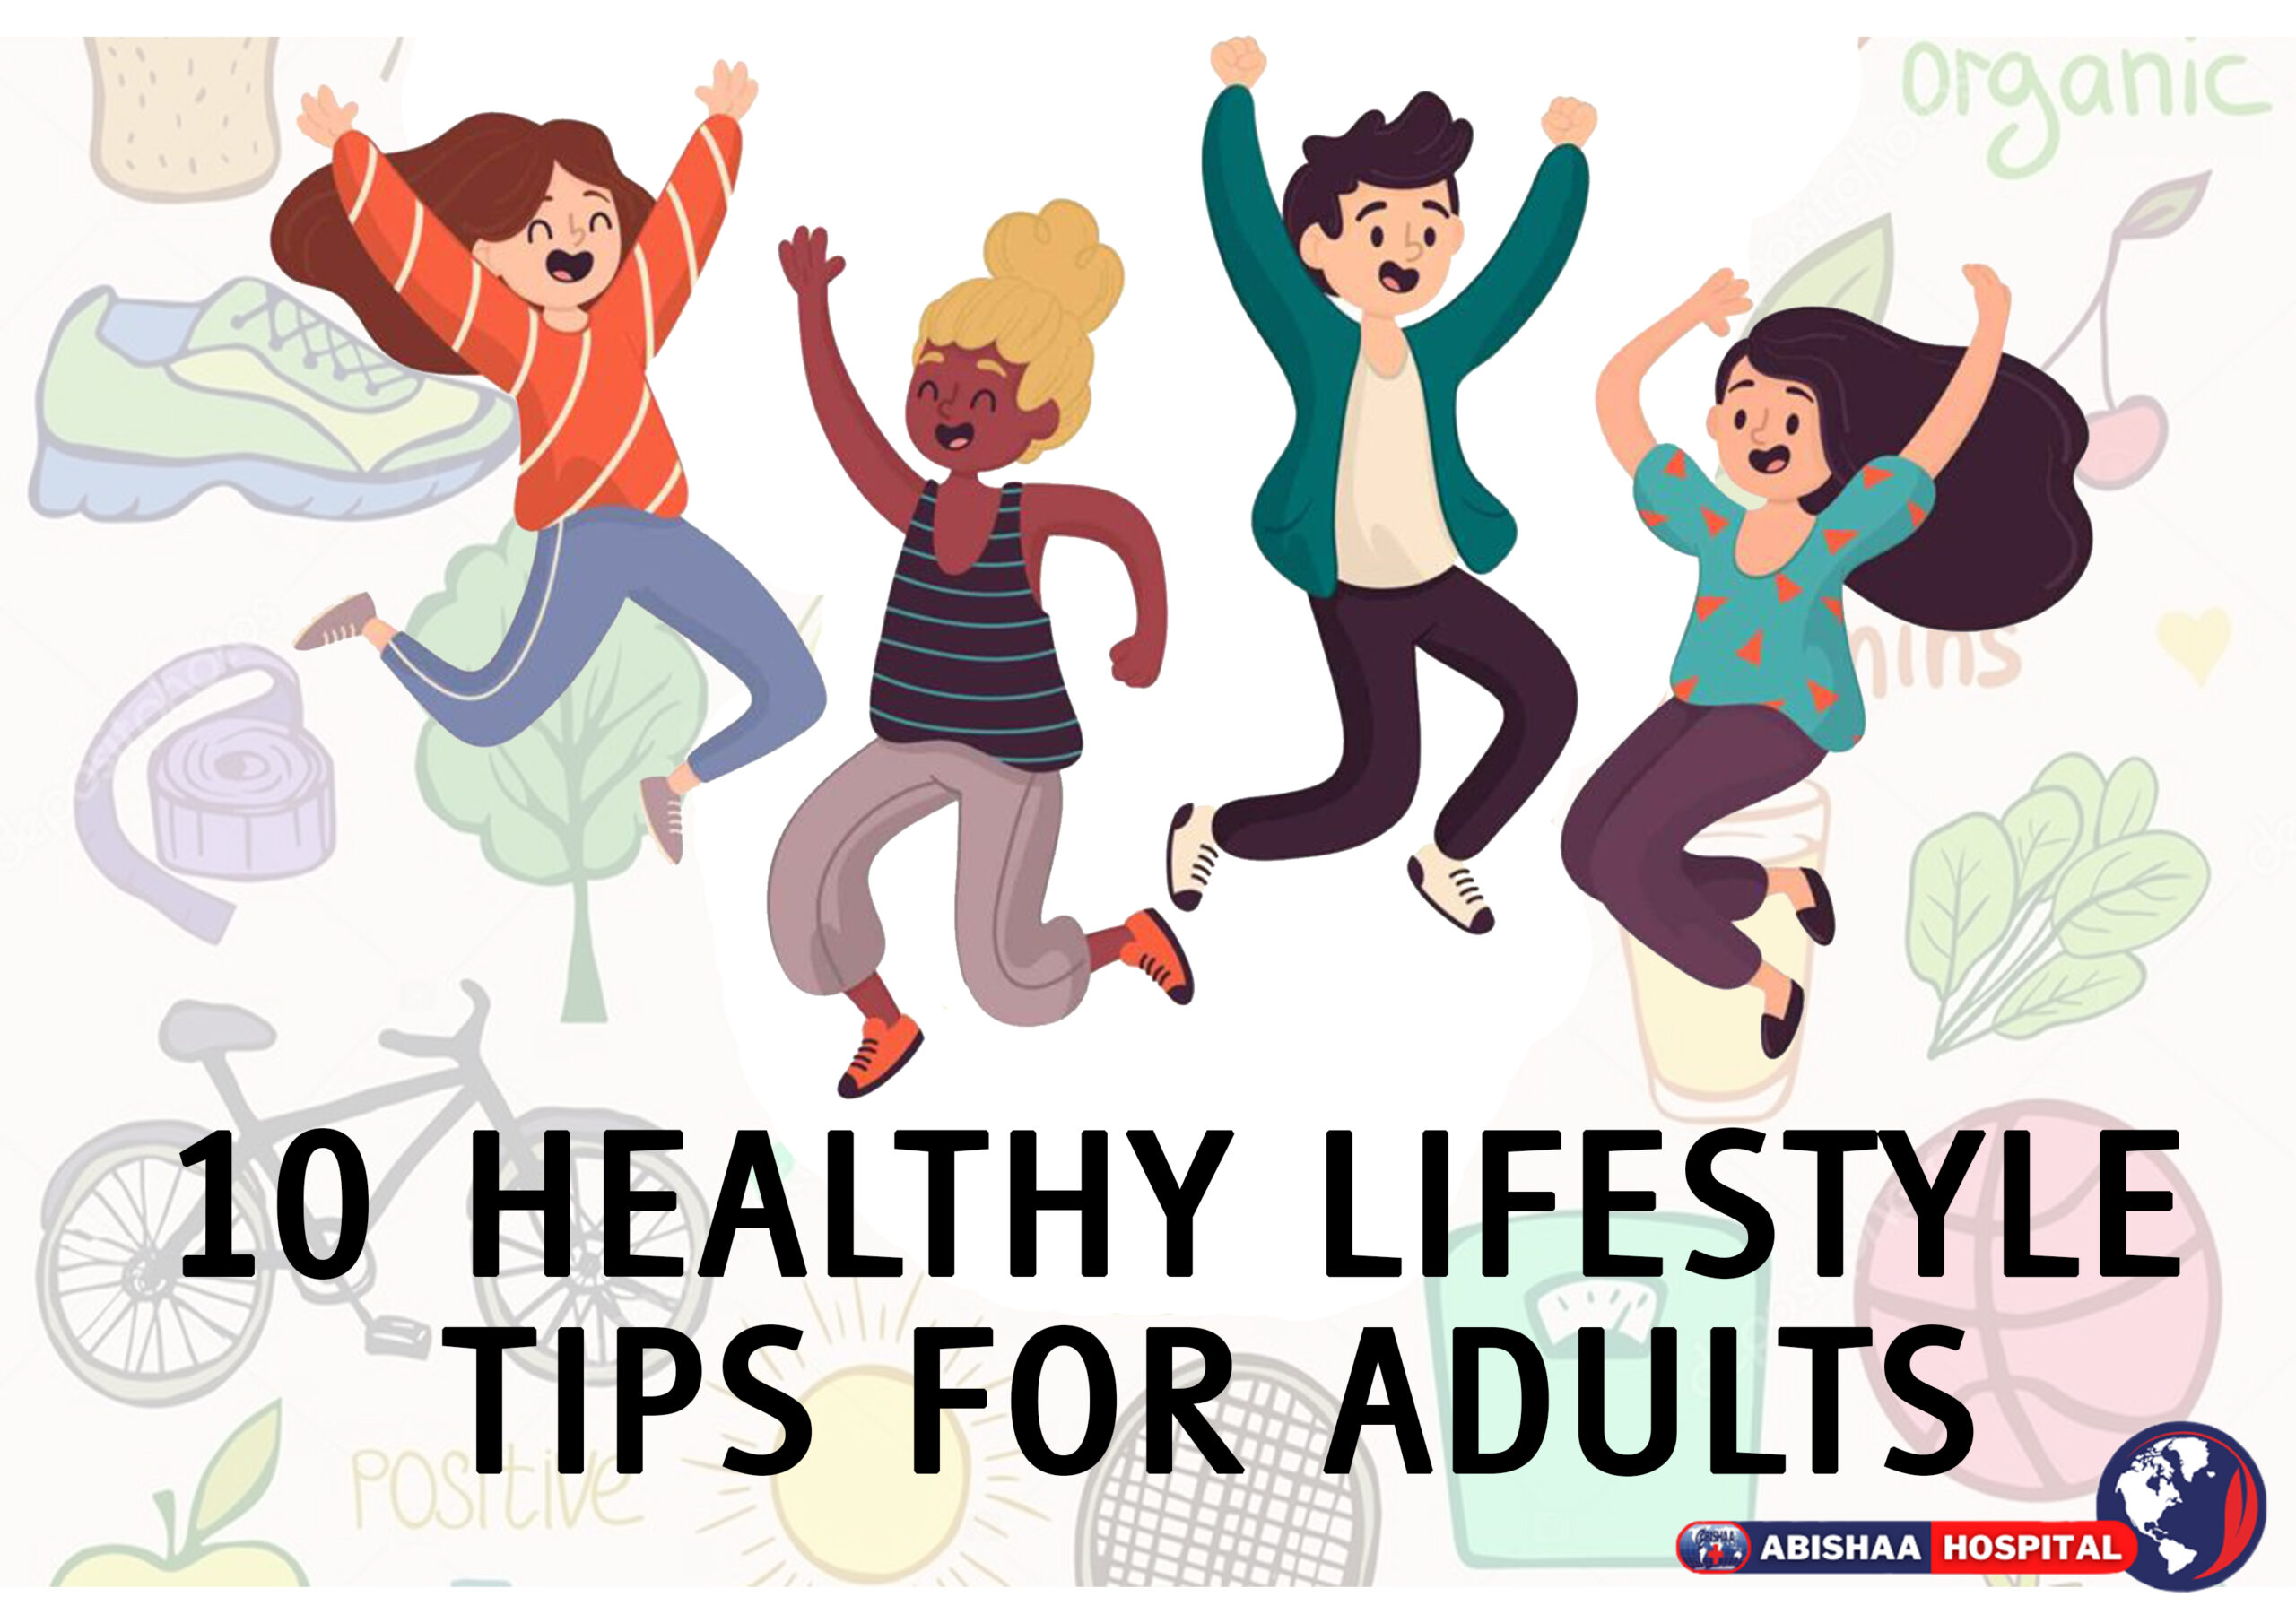 10 Healthy Lifestyle Tips for Adults scaled